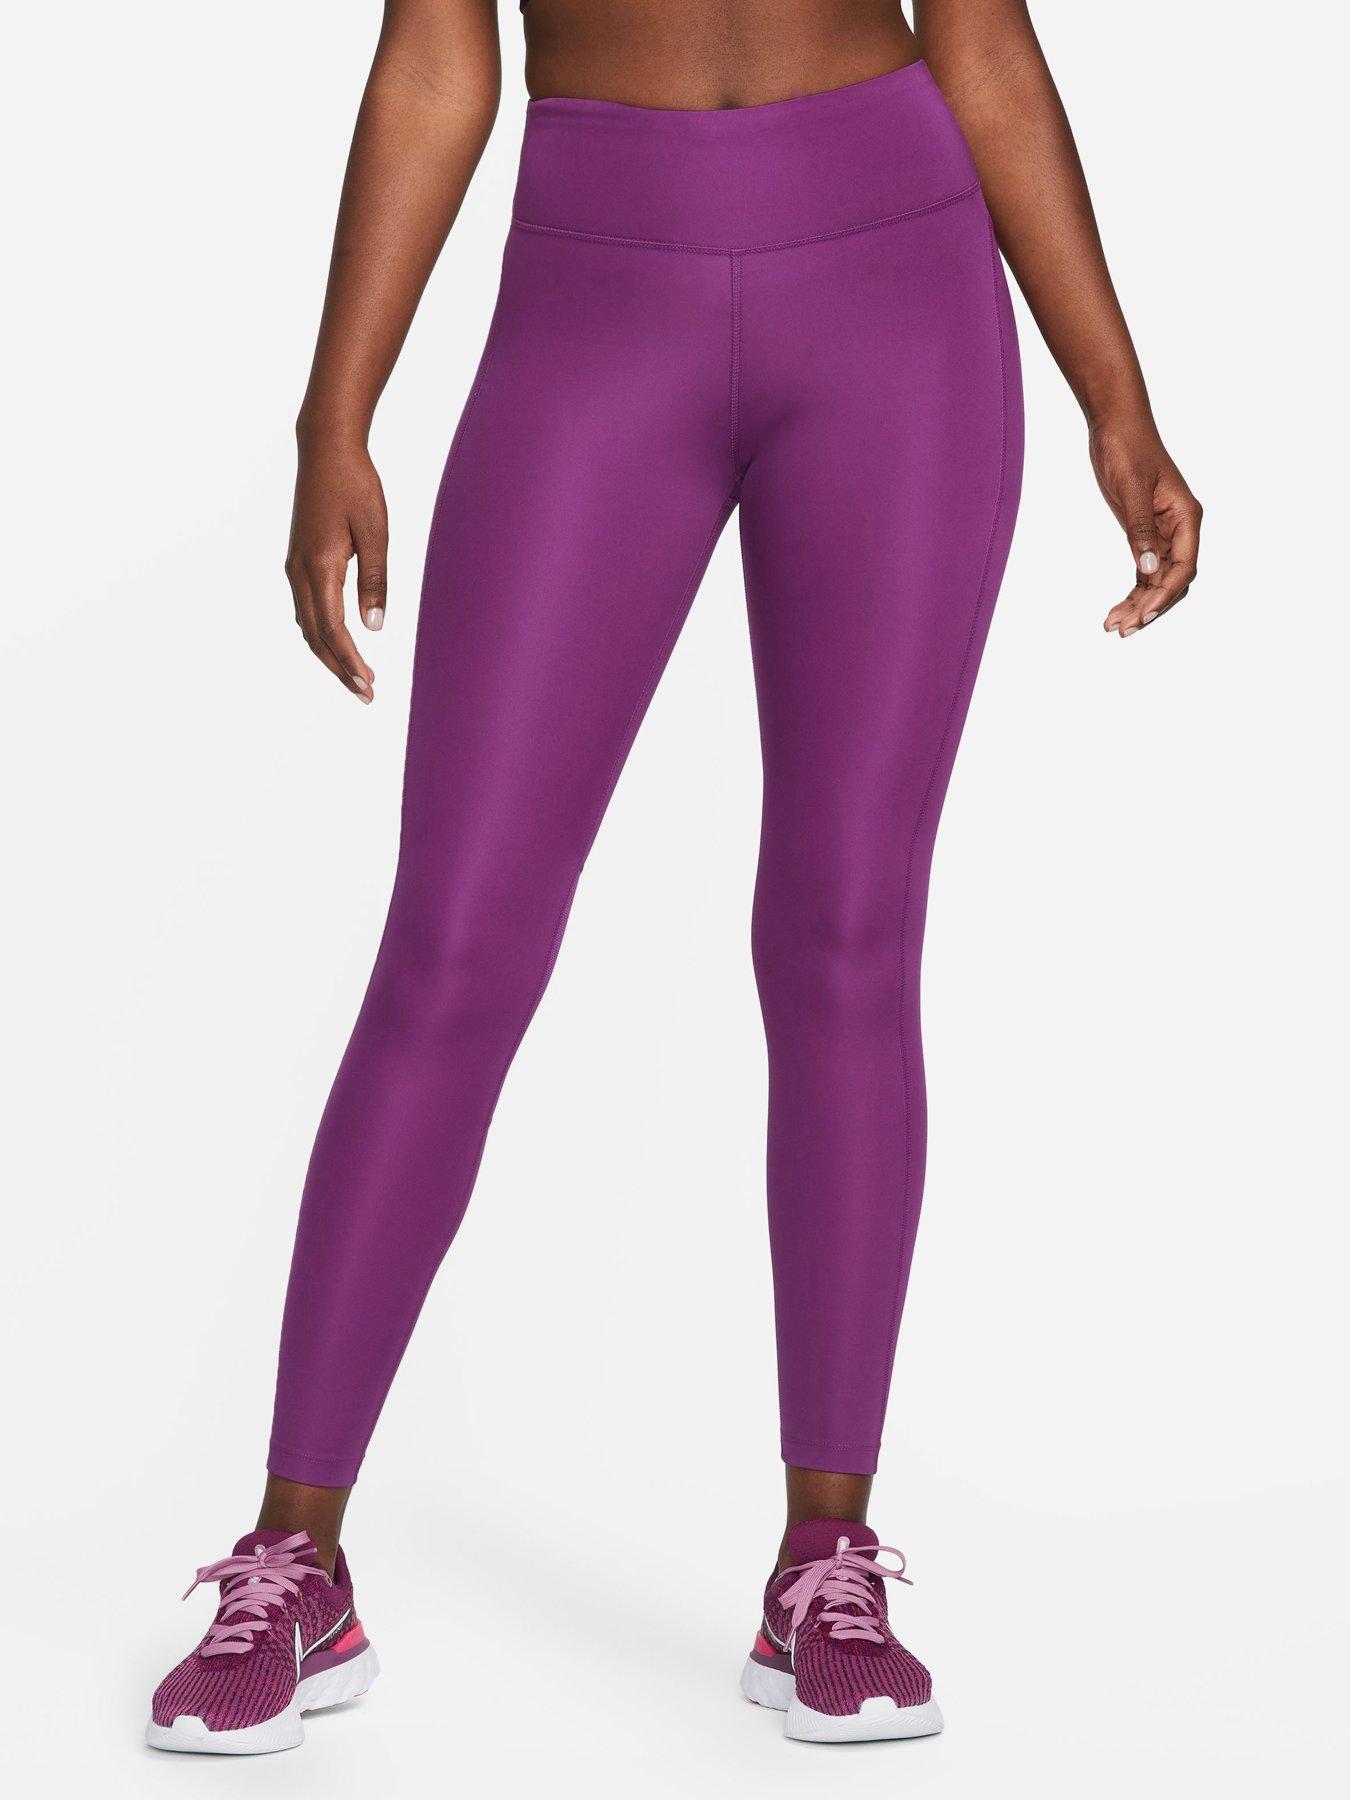 Nike Women's One Luxe Leggings Pink, Nike Luxe Tights